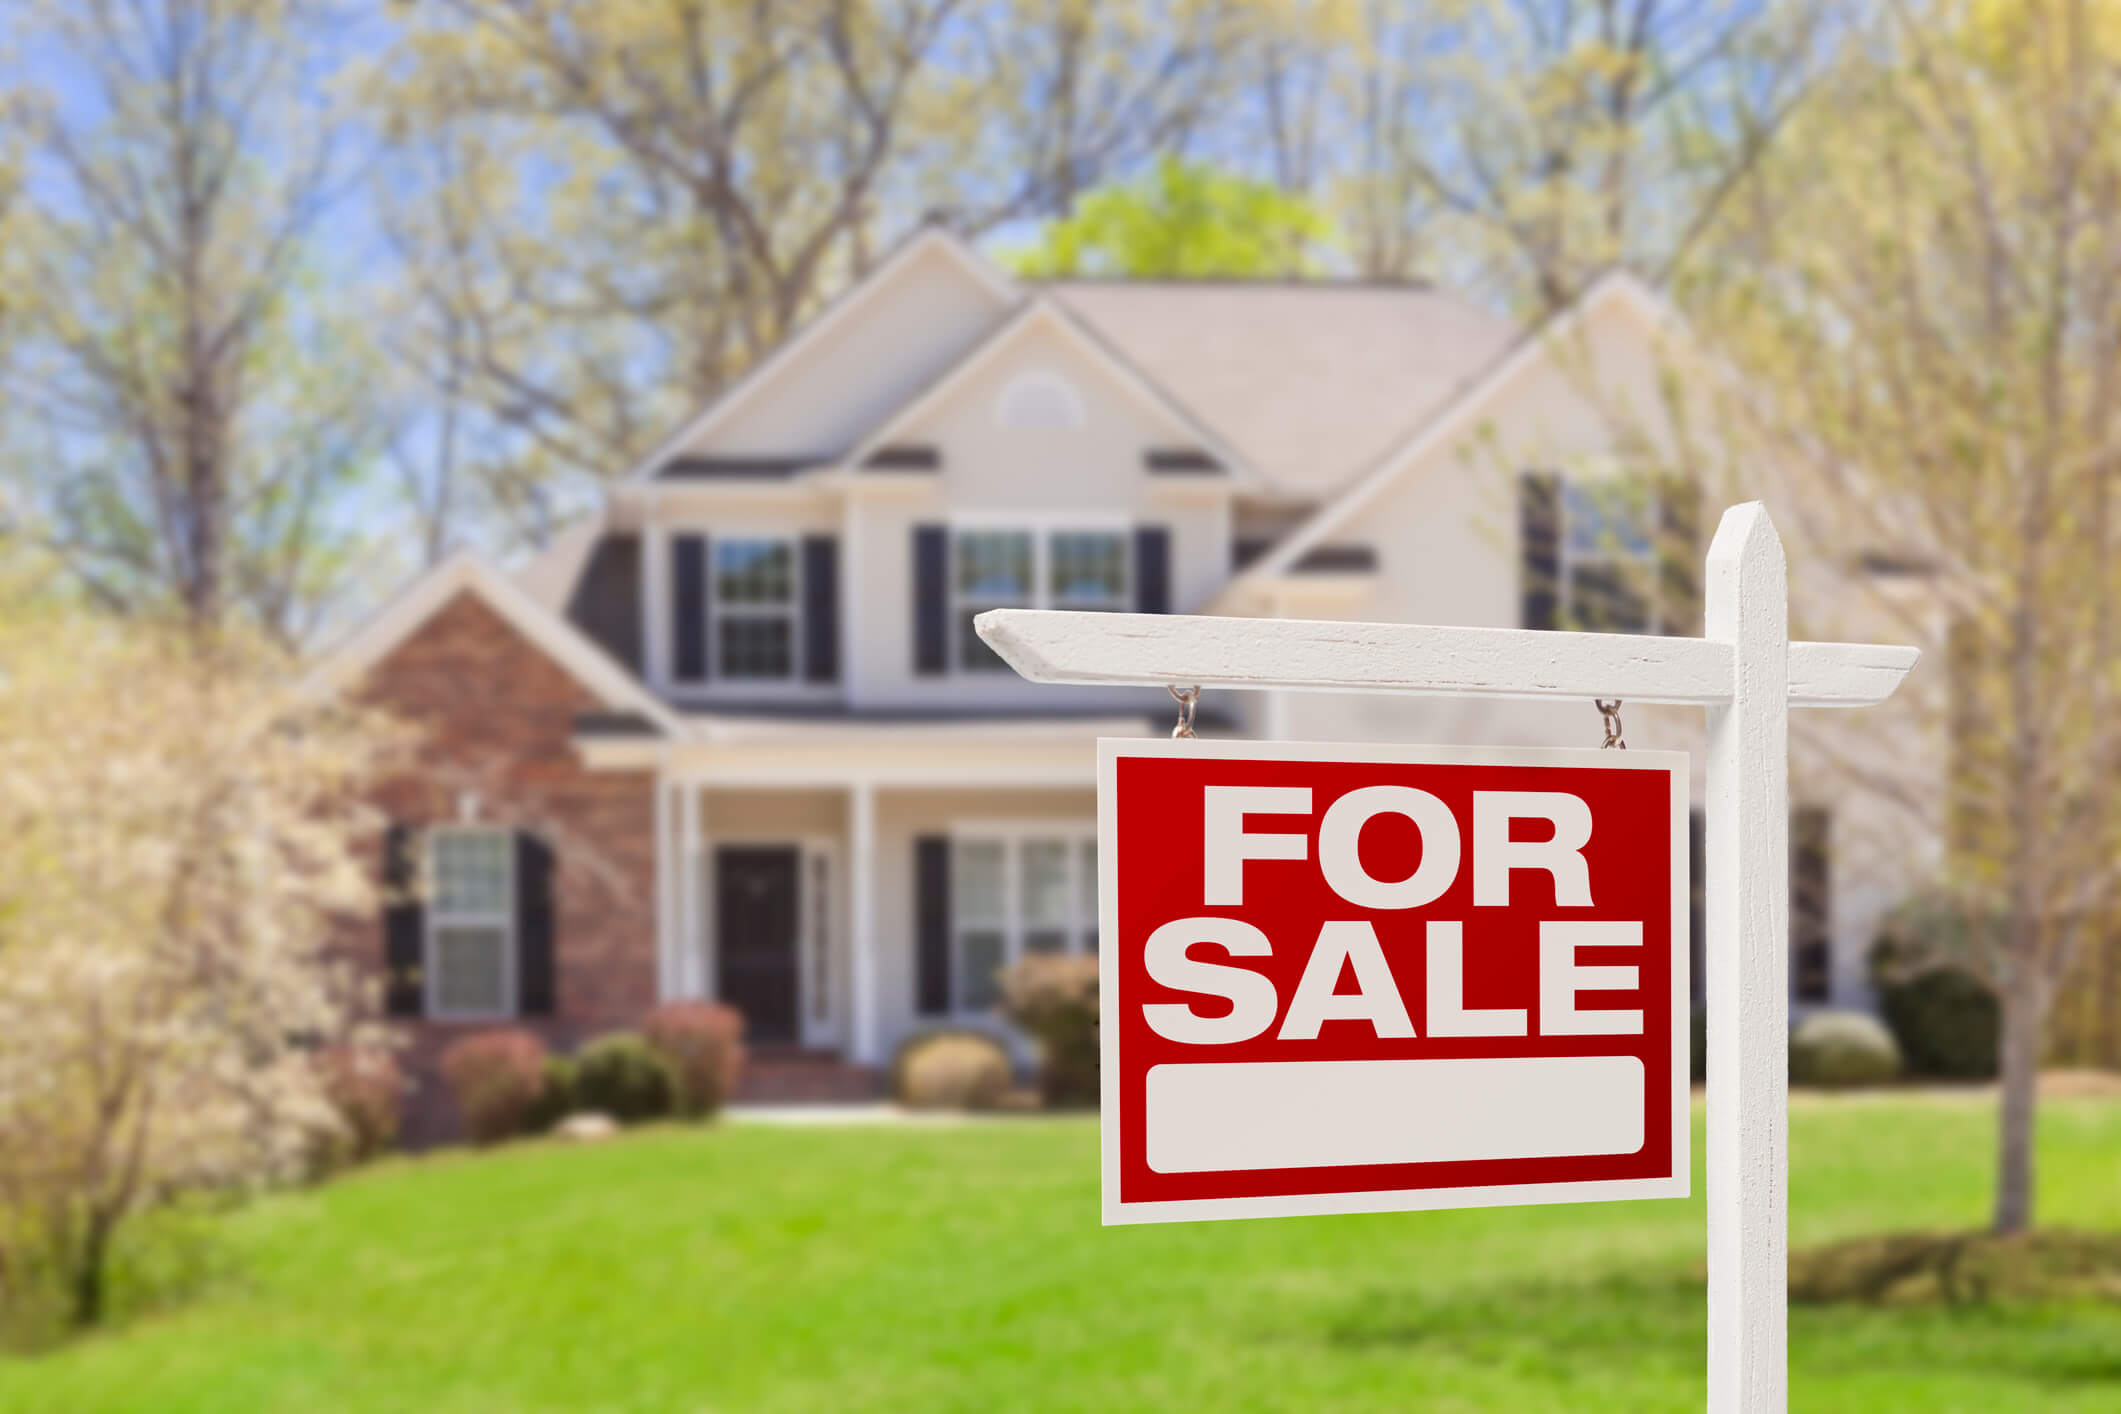 3 Hot Tips to Help You Sell Your Real Estate and Get Top Dollar